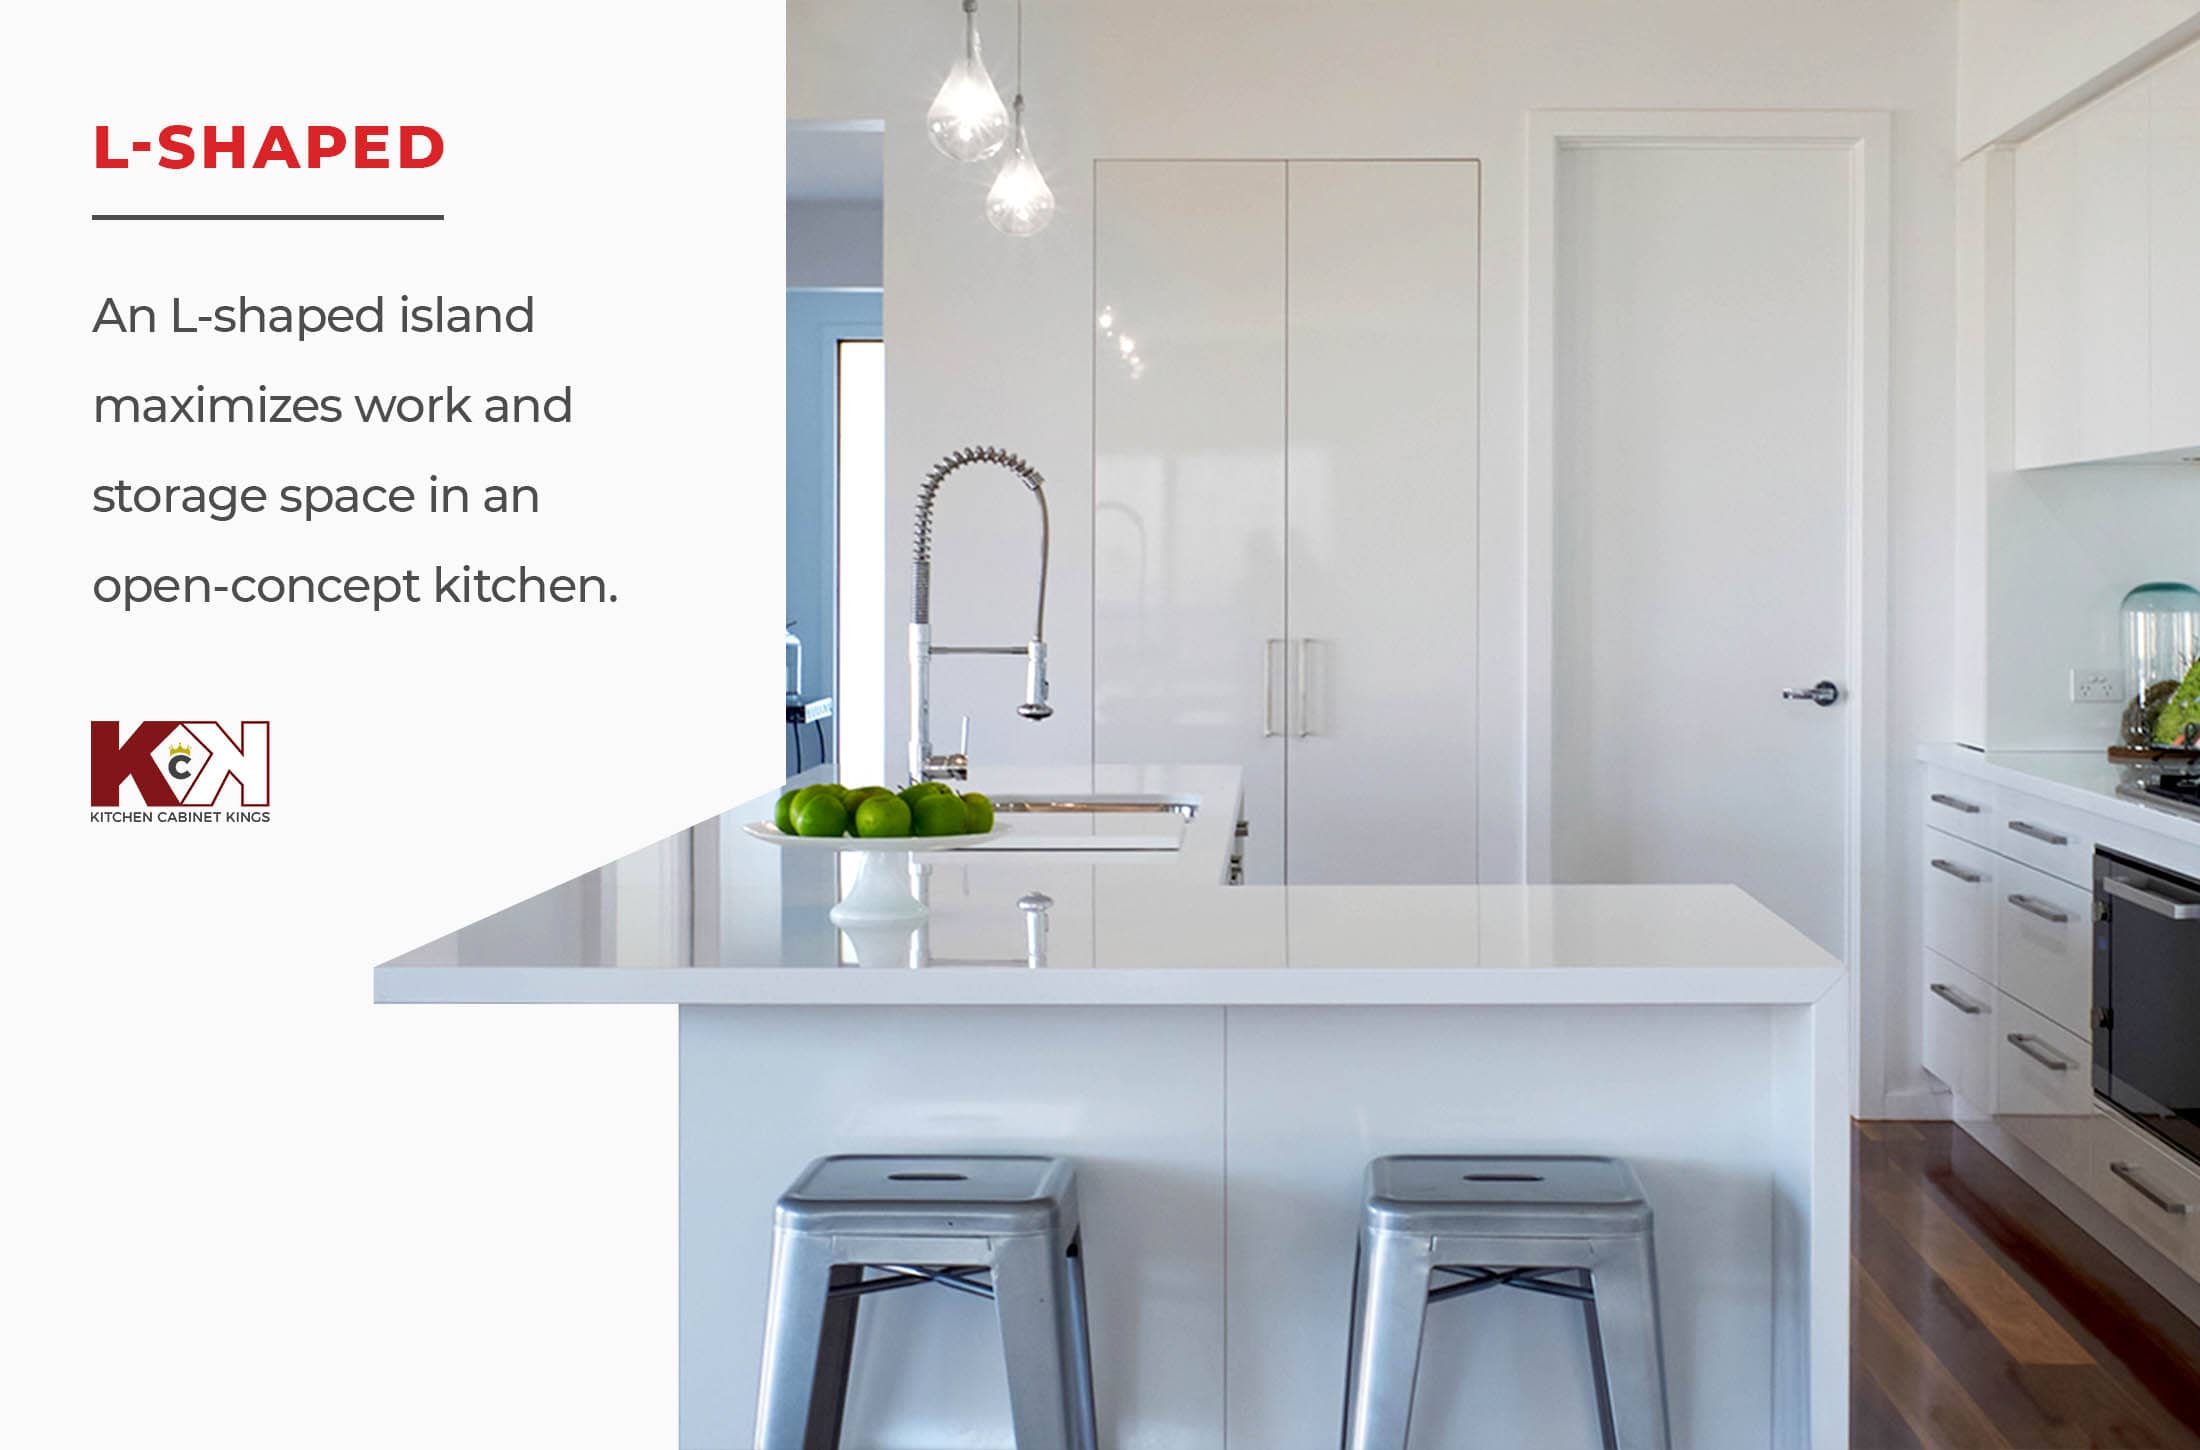 Image of L-shaped kitchen island with definition.